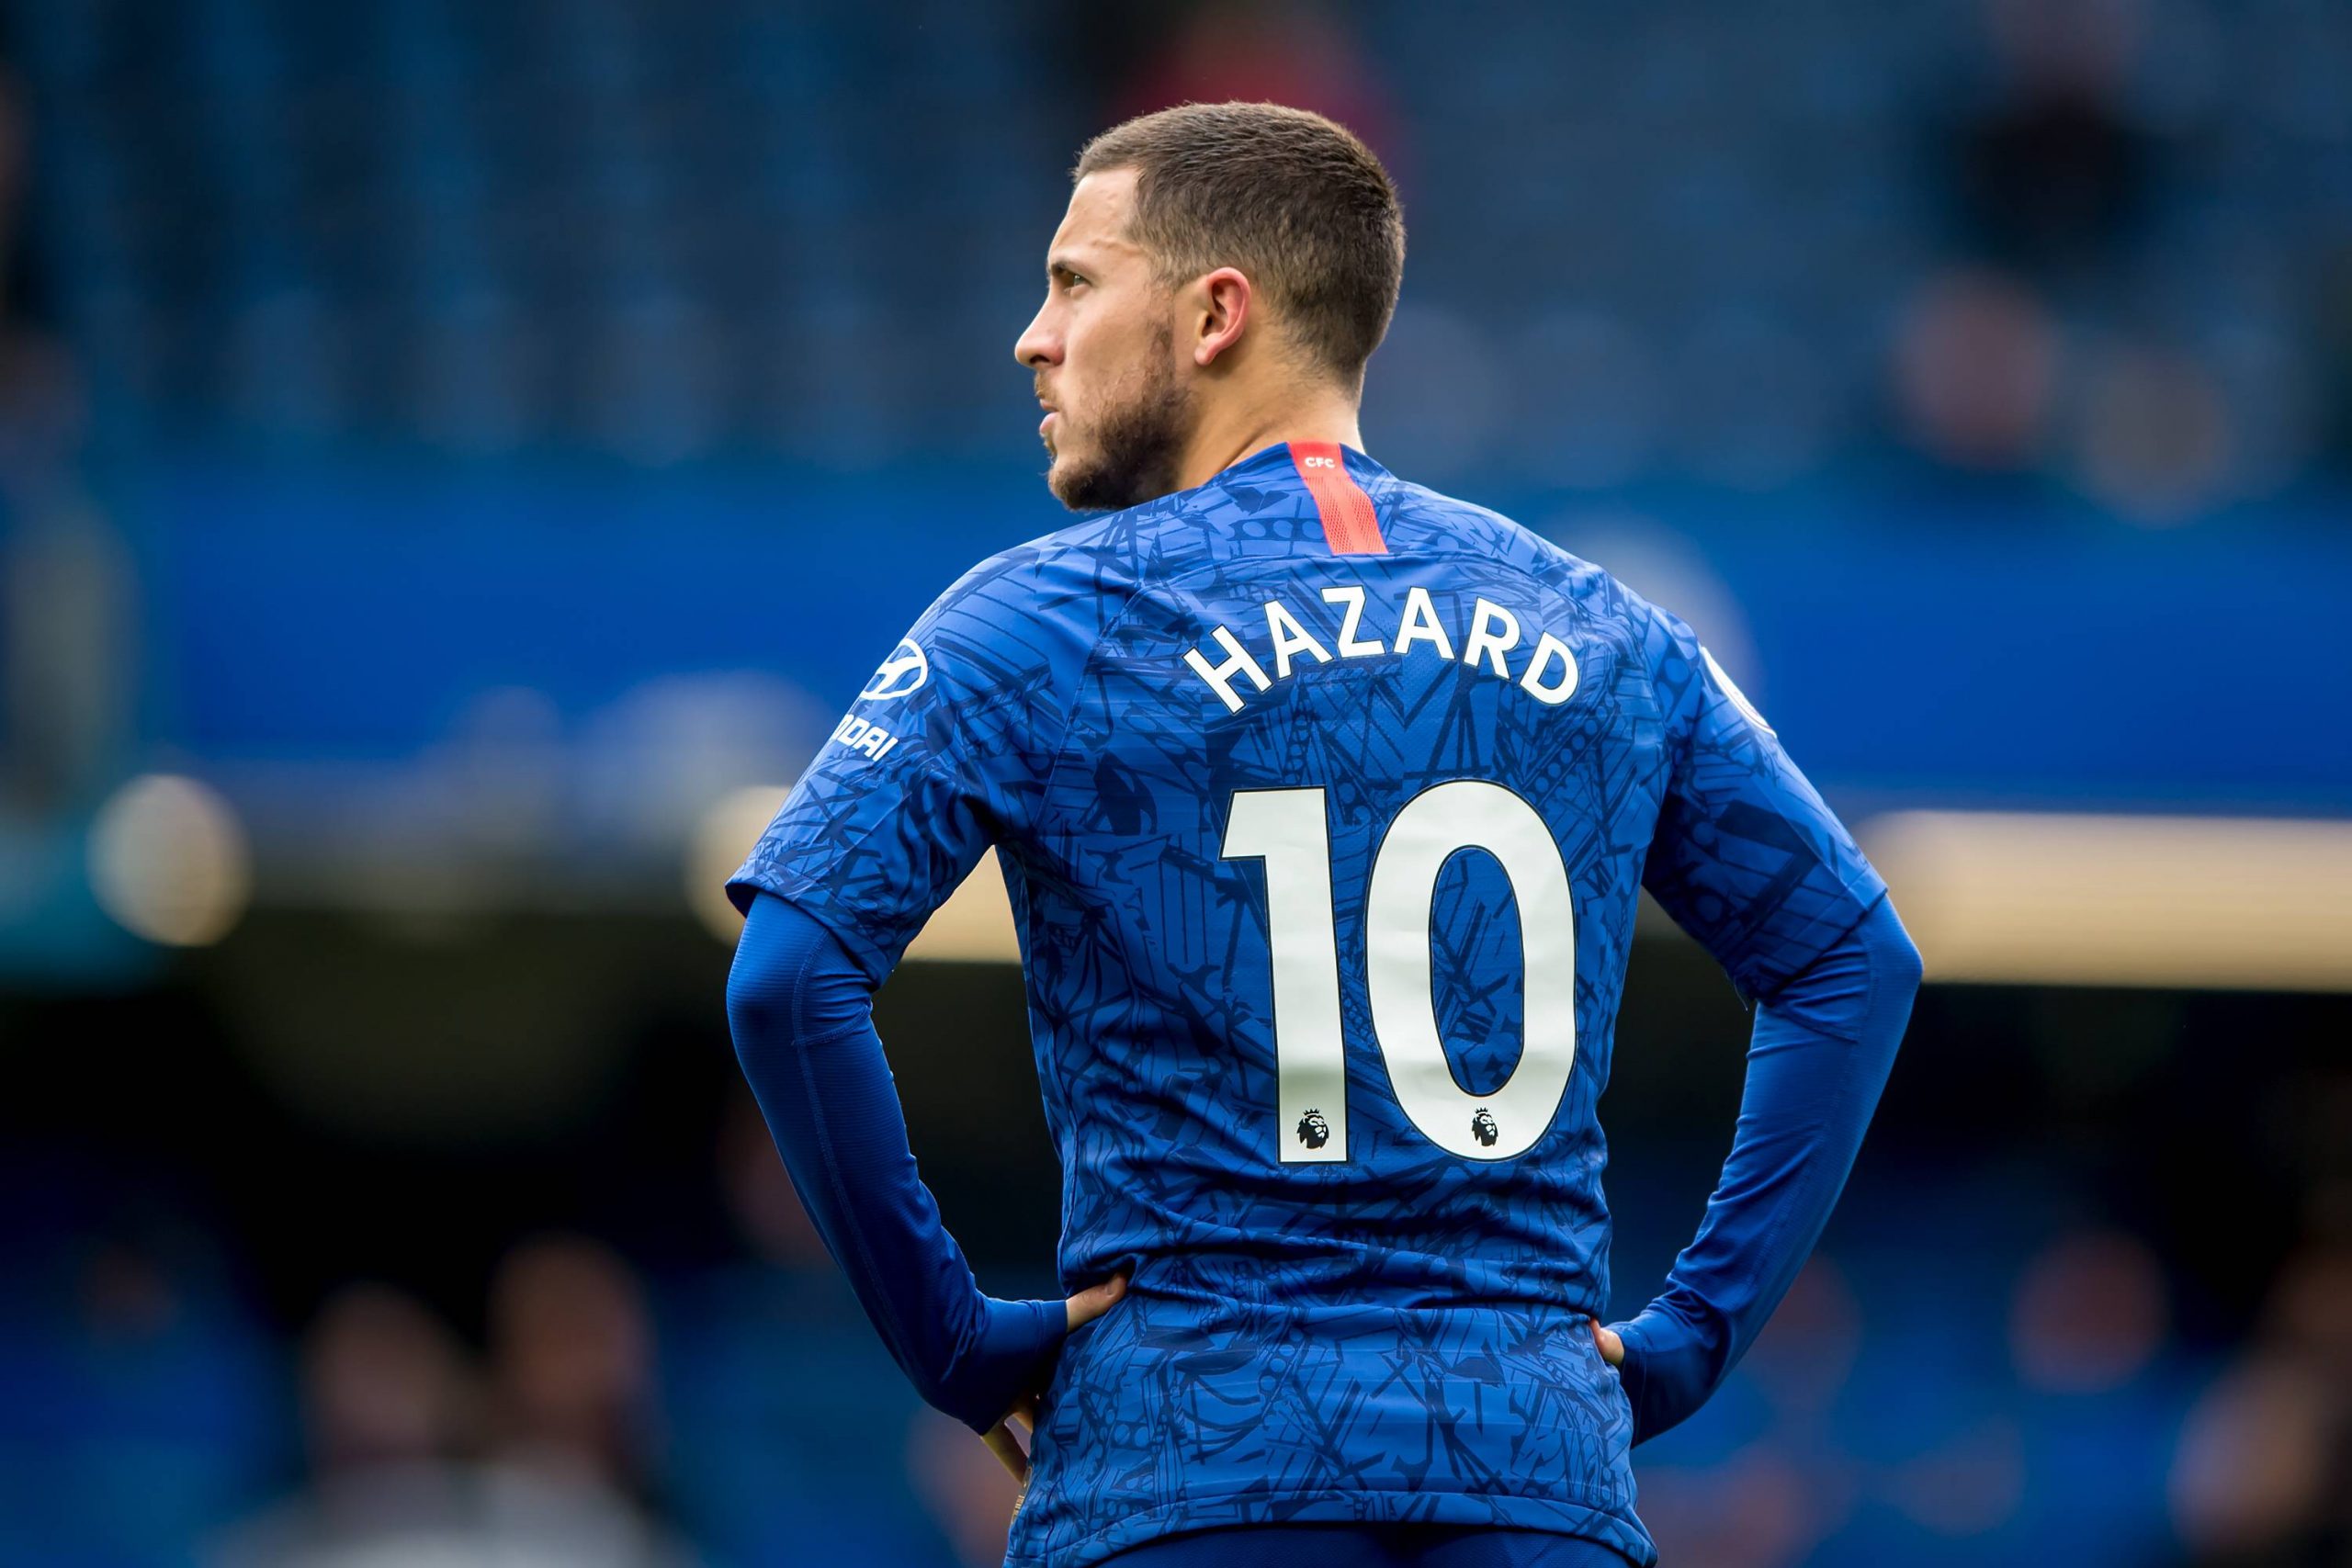 Could Eden Hazard of Real Madrid make a stunning return to Chelsea in the summer transfer window?